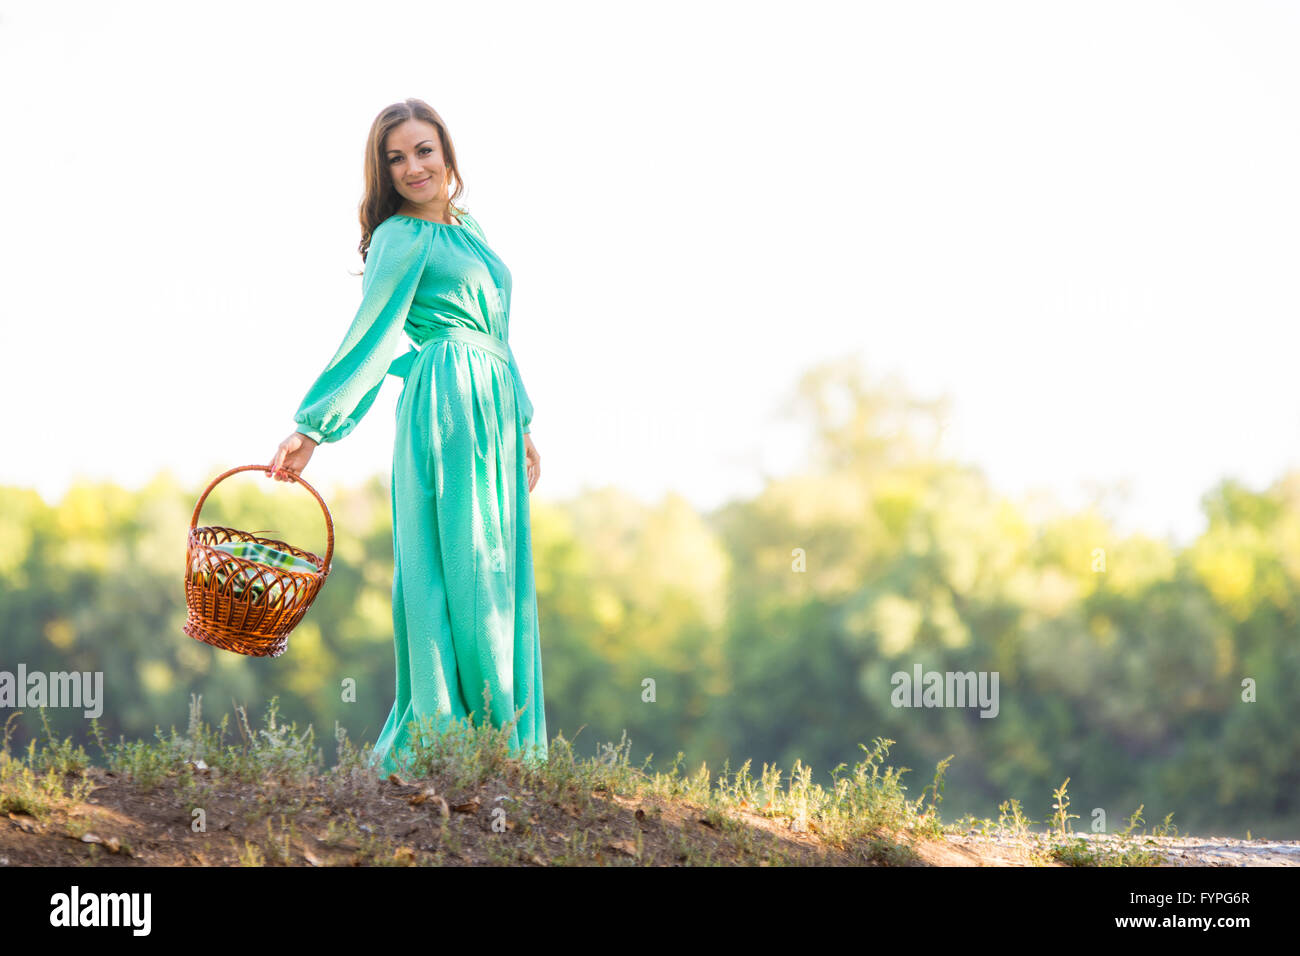 The girl with a basket in a long dress and in a good mood is on the hill Stock Photo